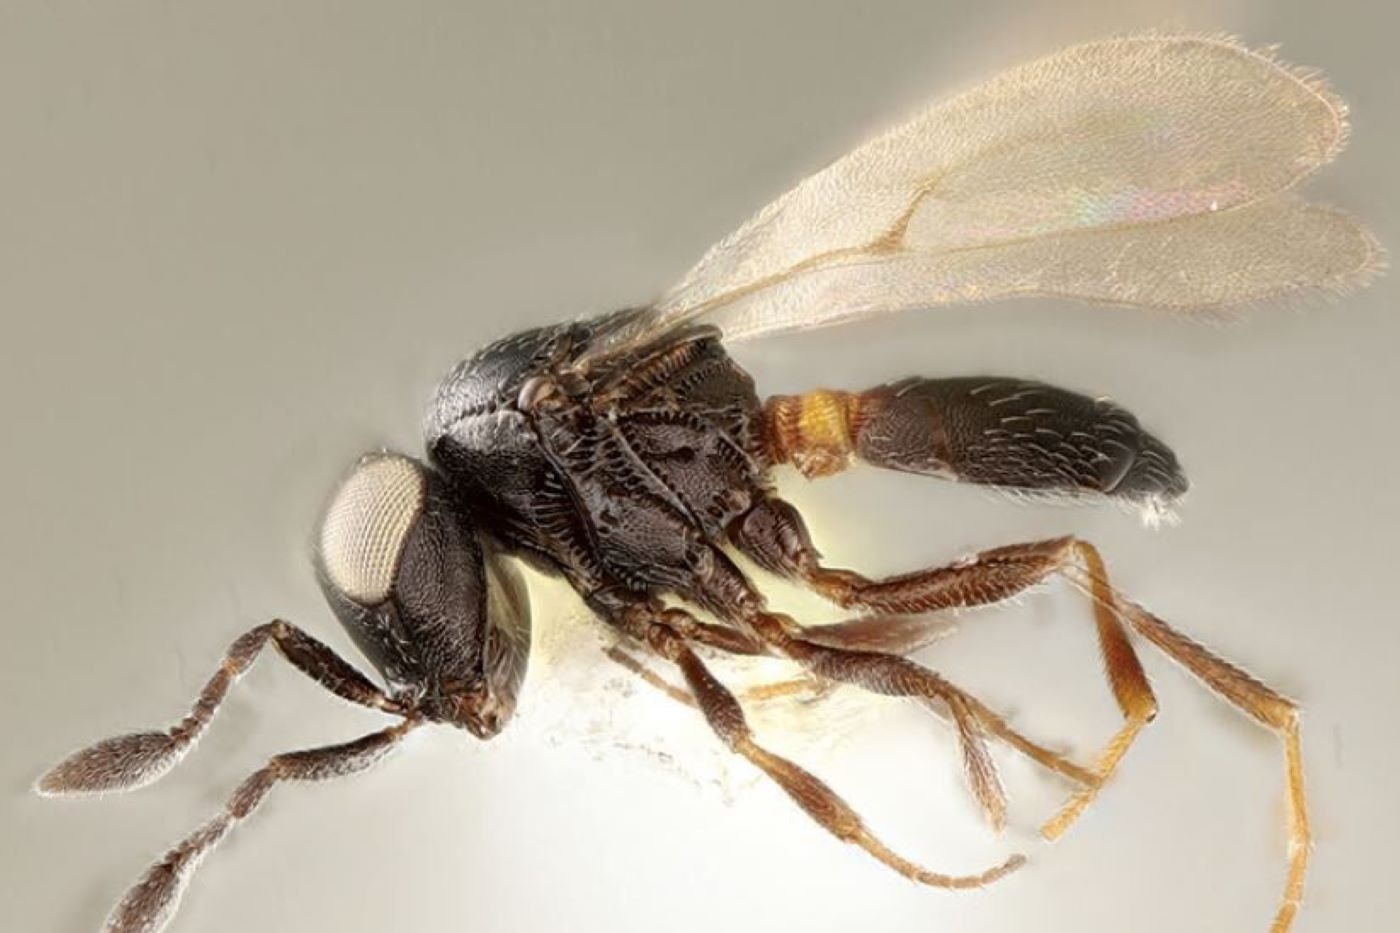 New wasp species named after Idris Elba - Epping Forest Guardian